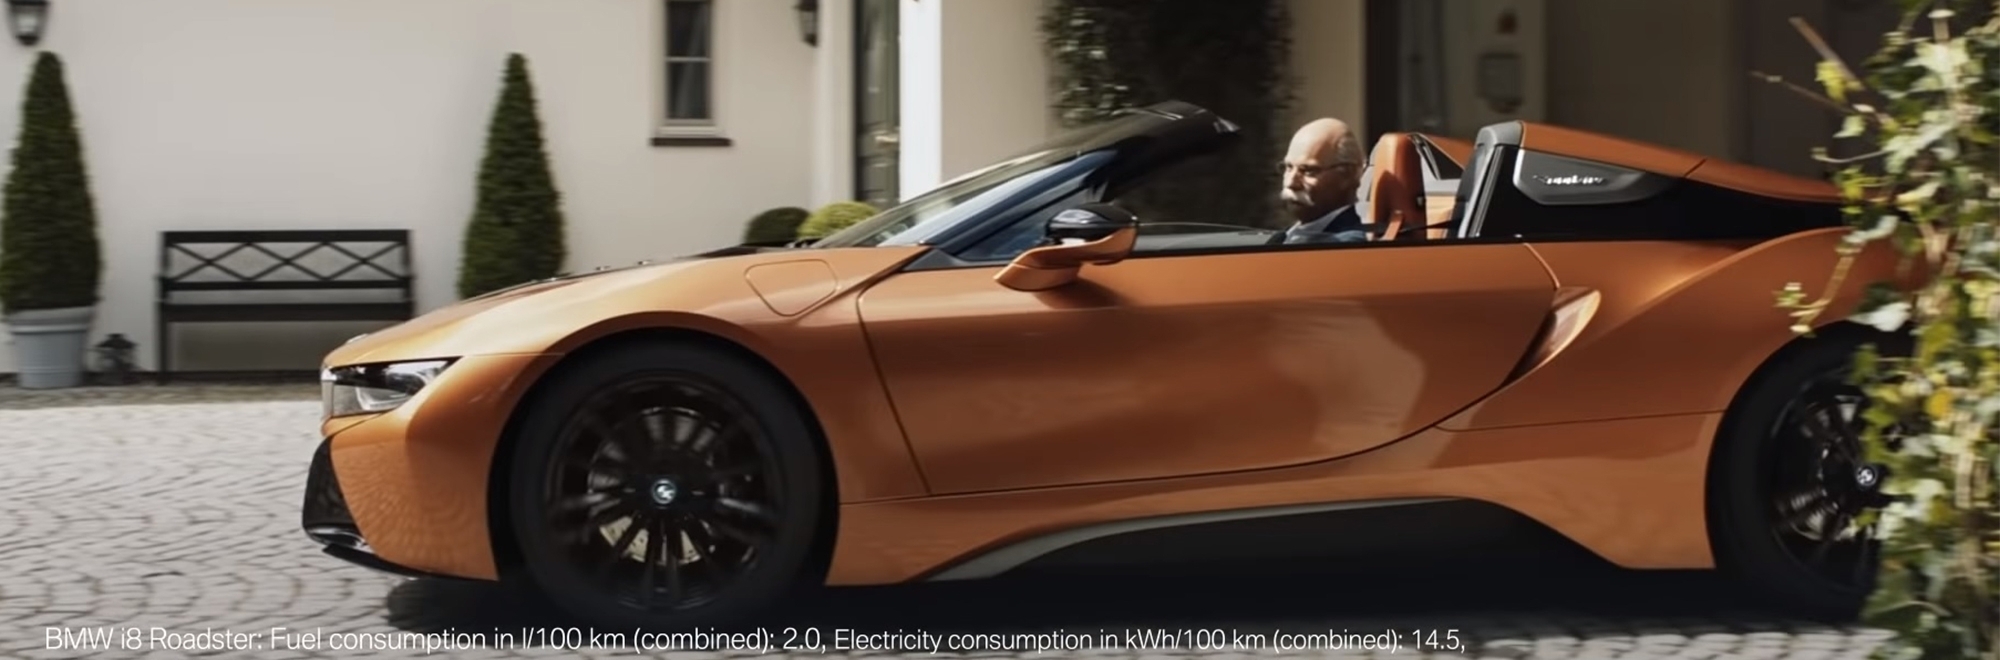 How BMW stole the limelight from Mercedes' retiring CEO in this cheeky video